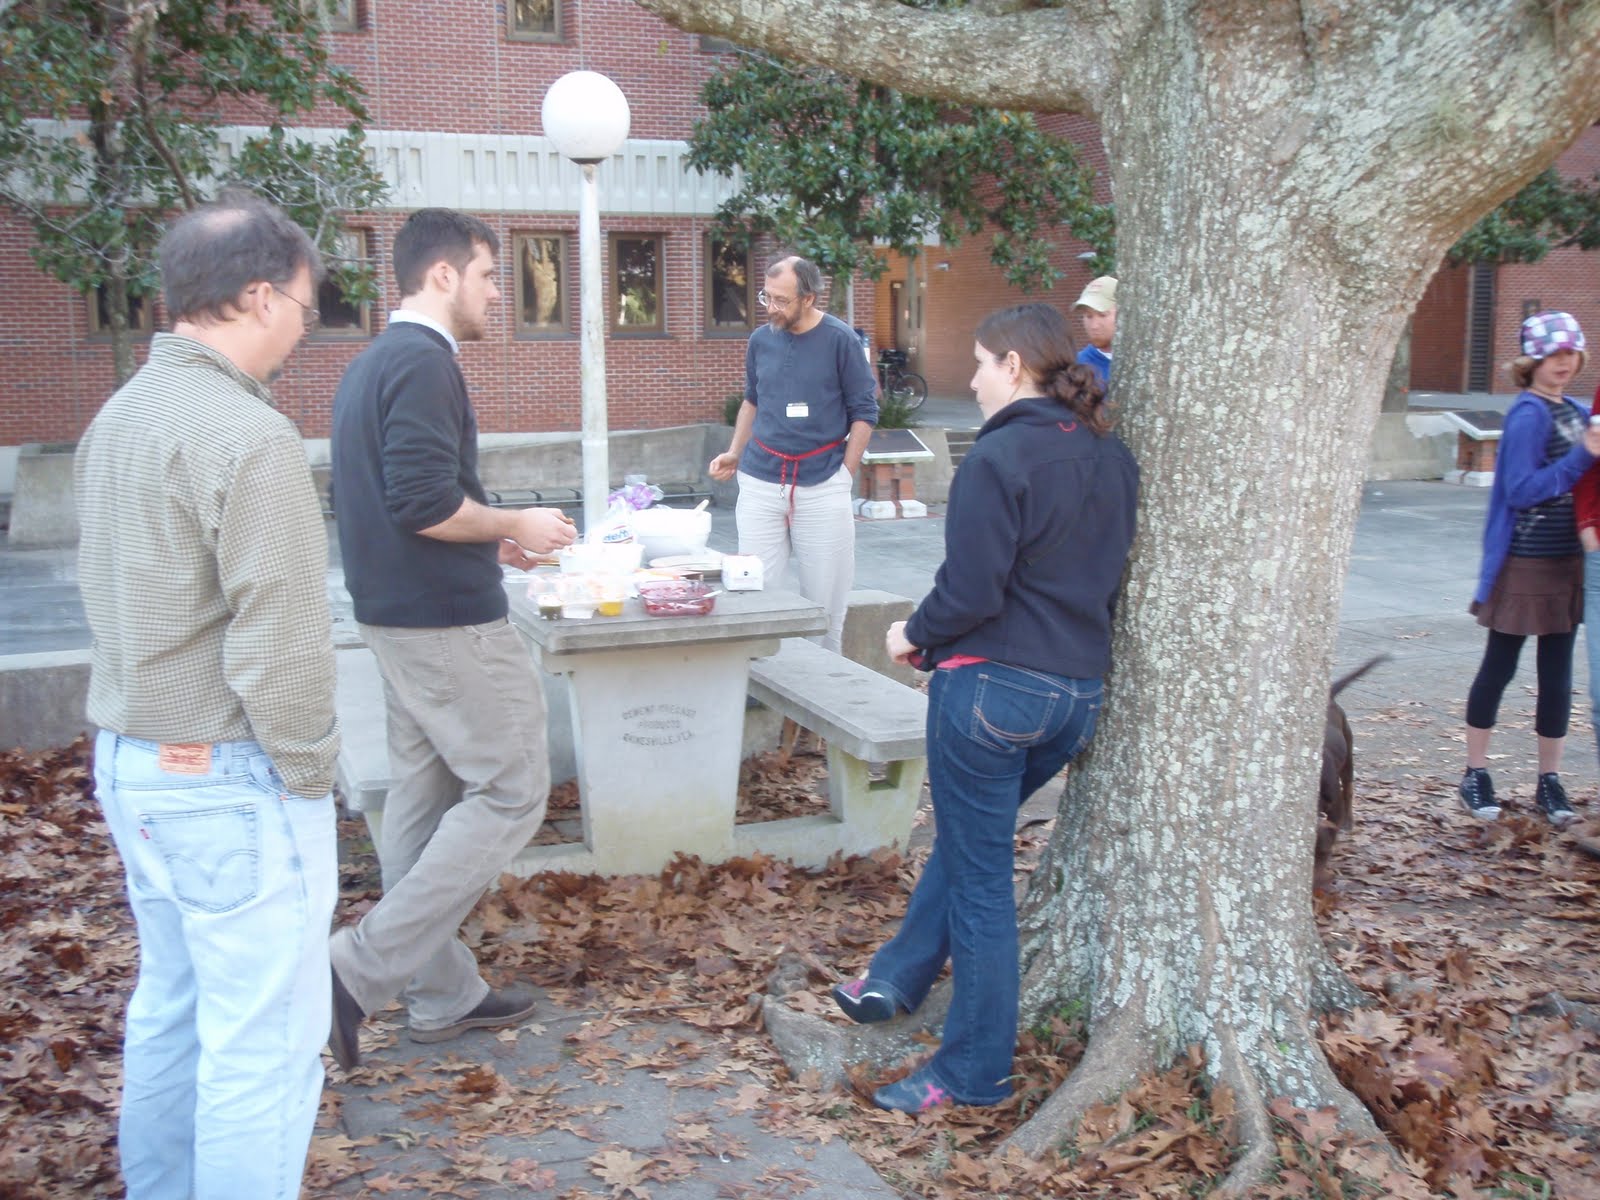 IZ crew at the picnic tables outside Dickinson Hall. Visible puppy tail